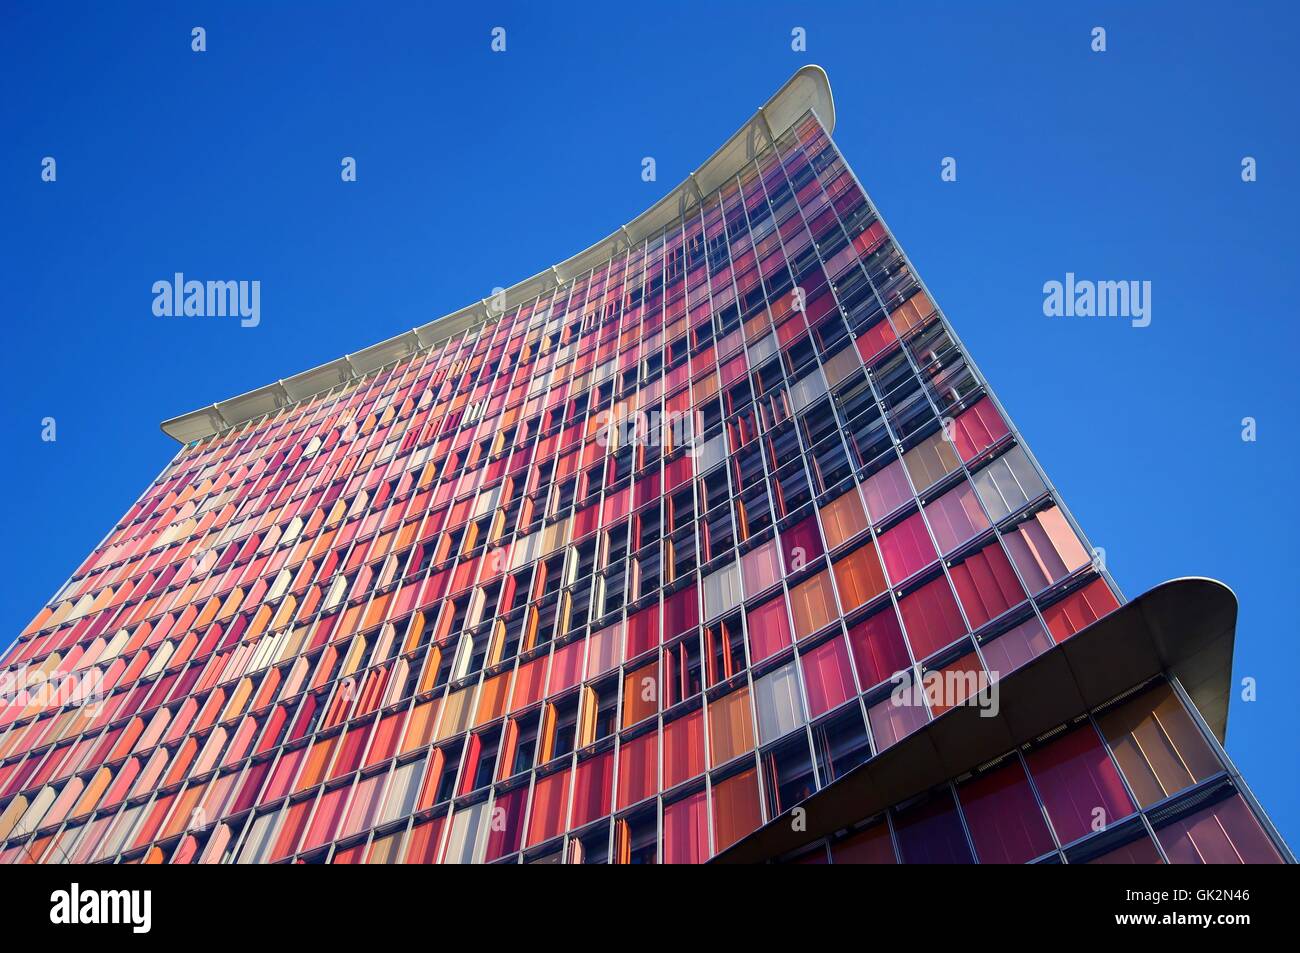 detail house multistory building Stock Photo